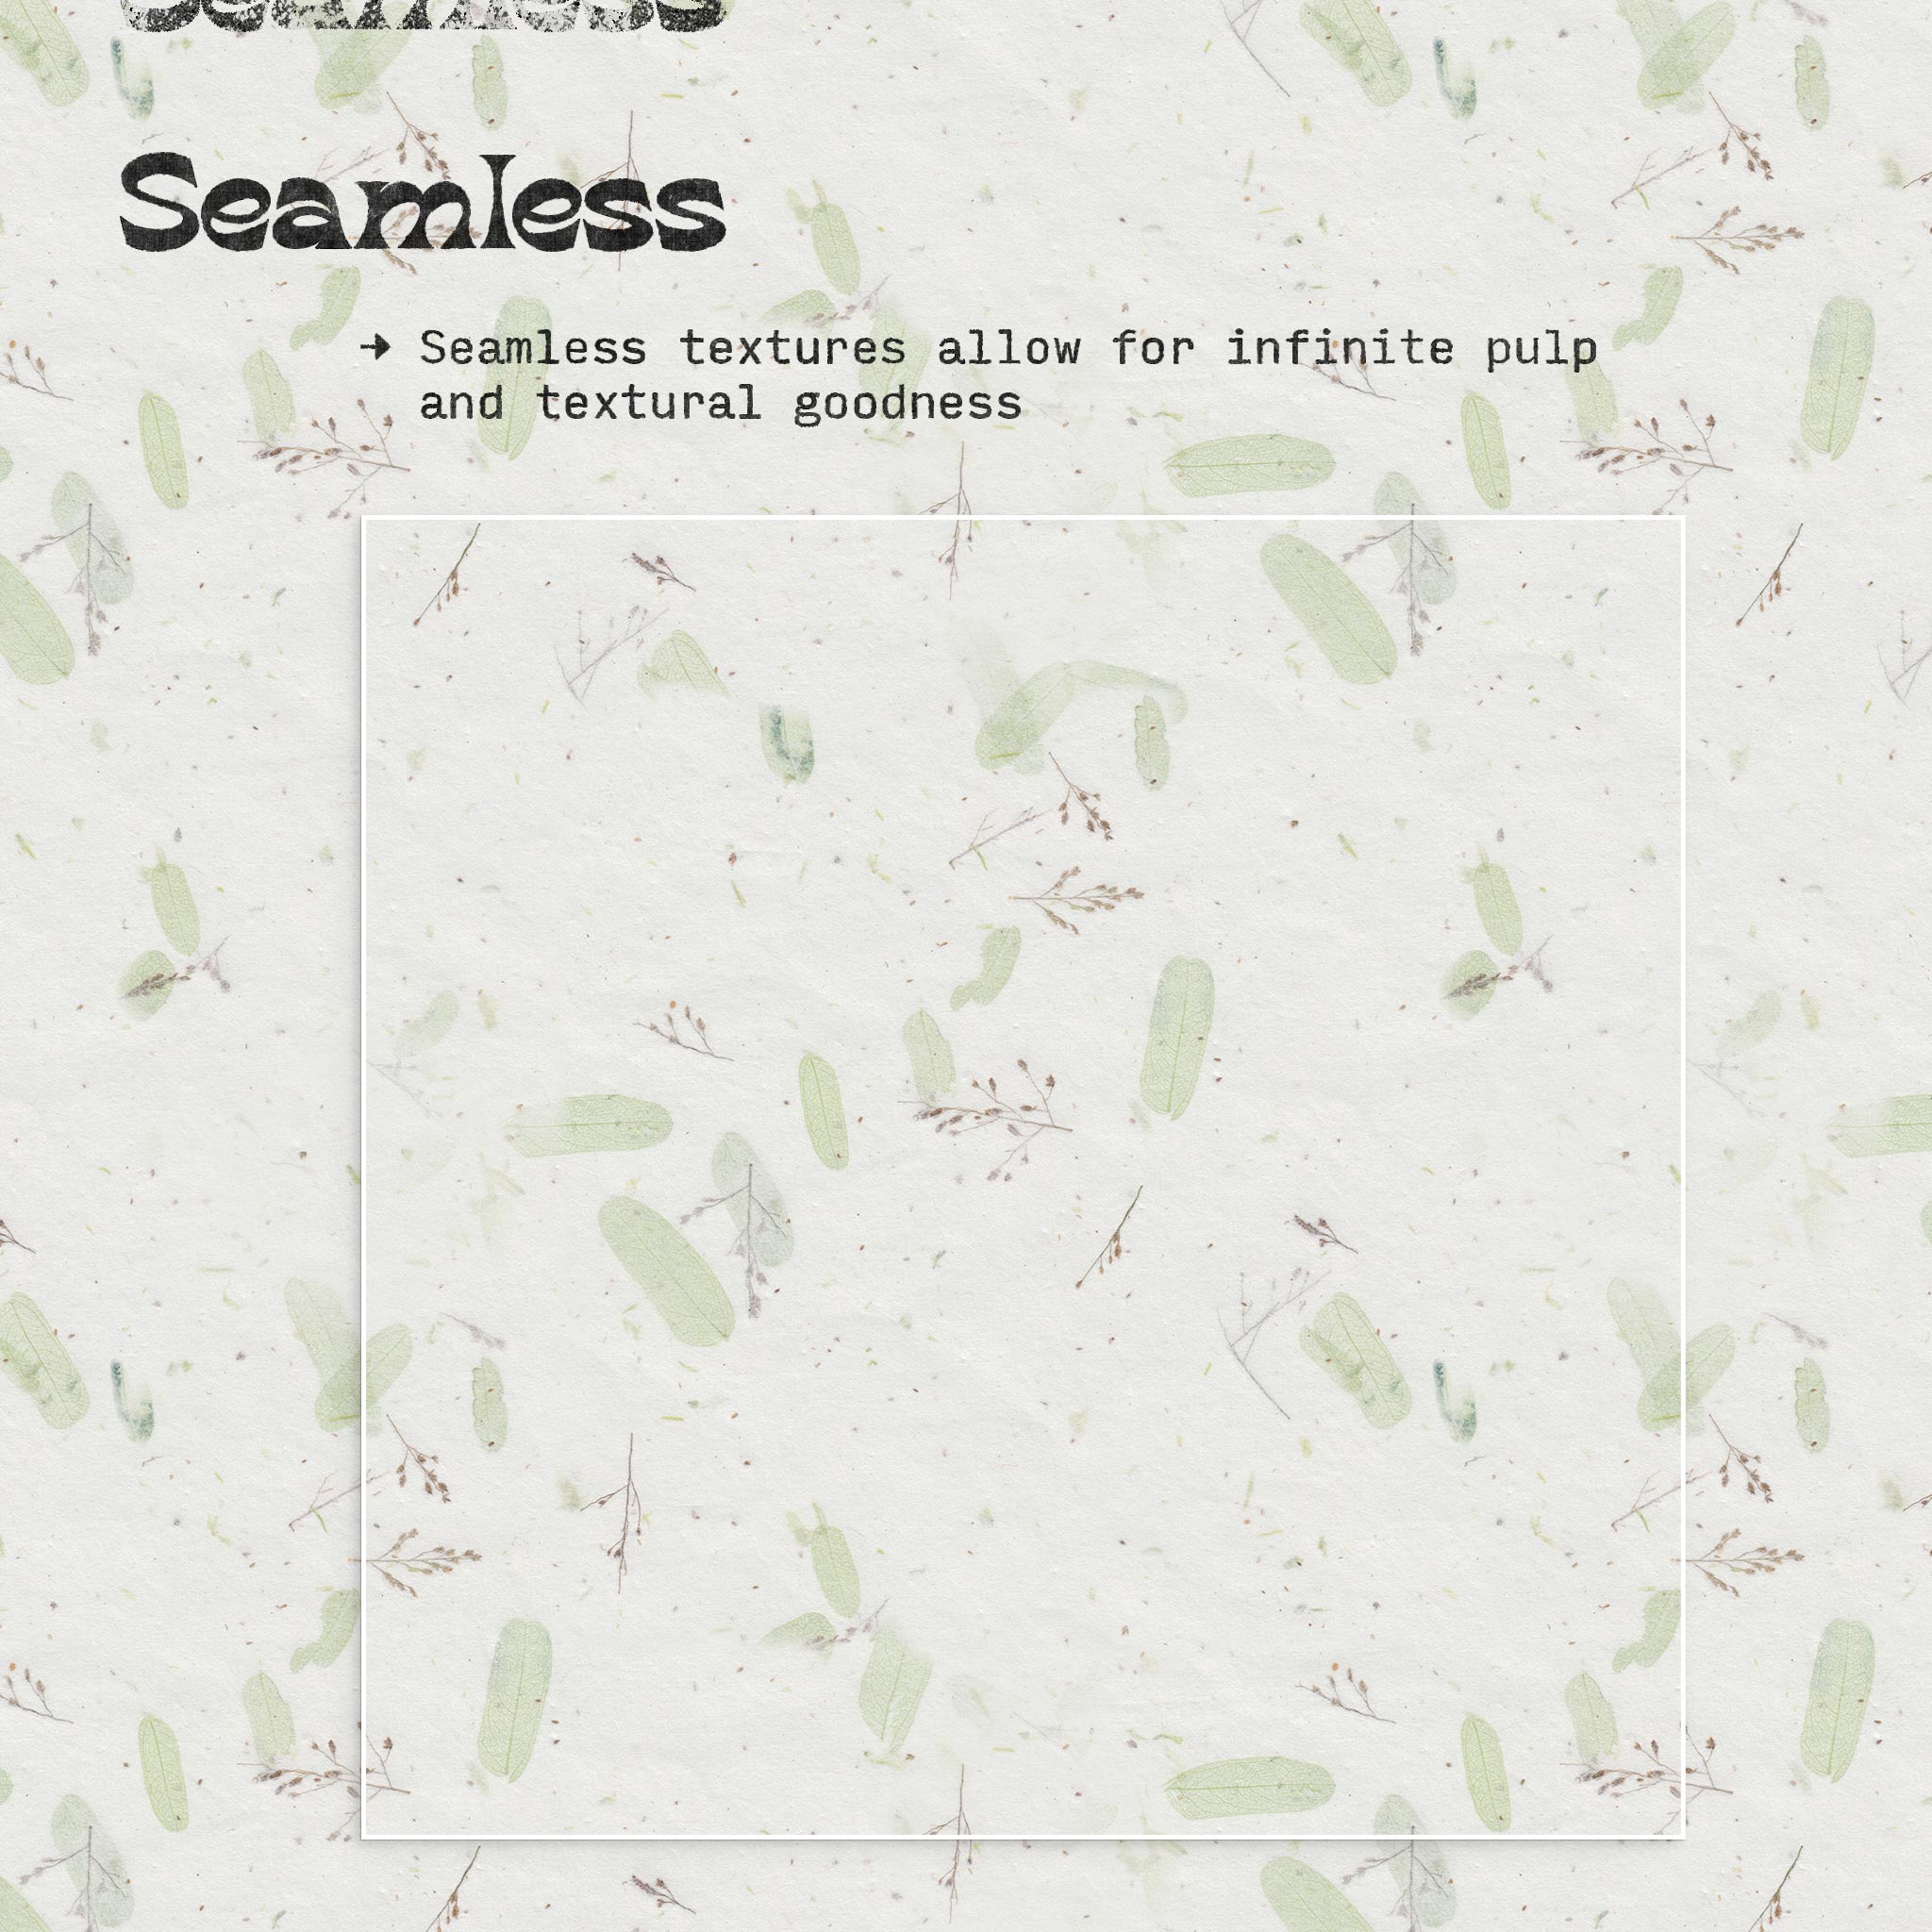 Handmade paper – Free Seamless Textures - All rights reseved